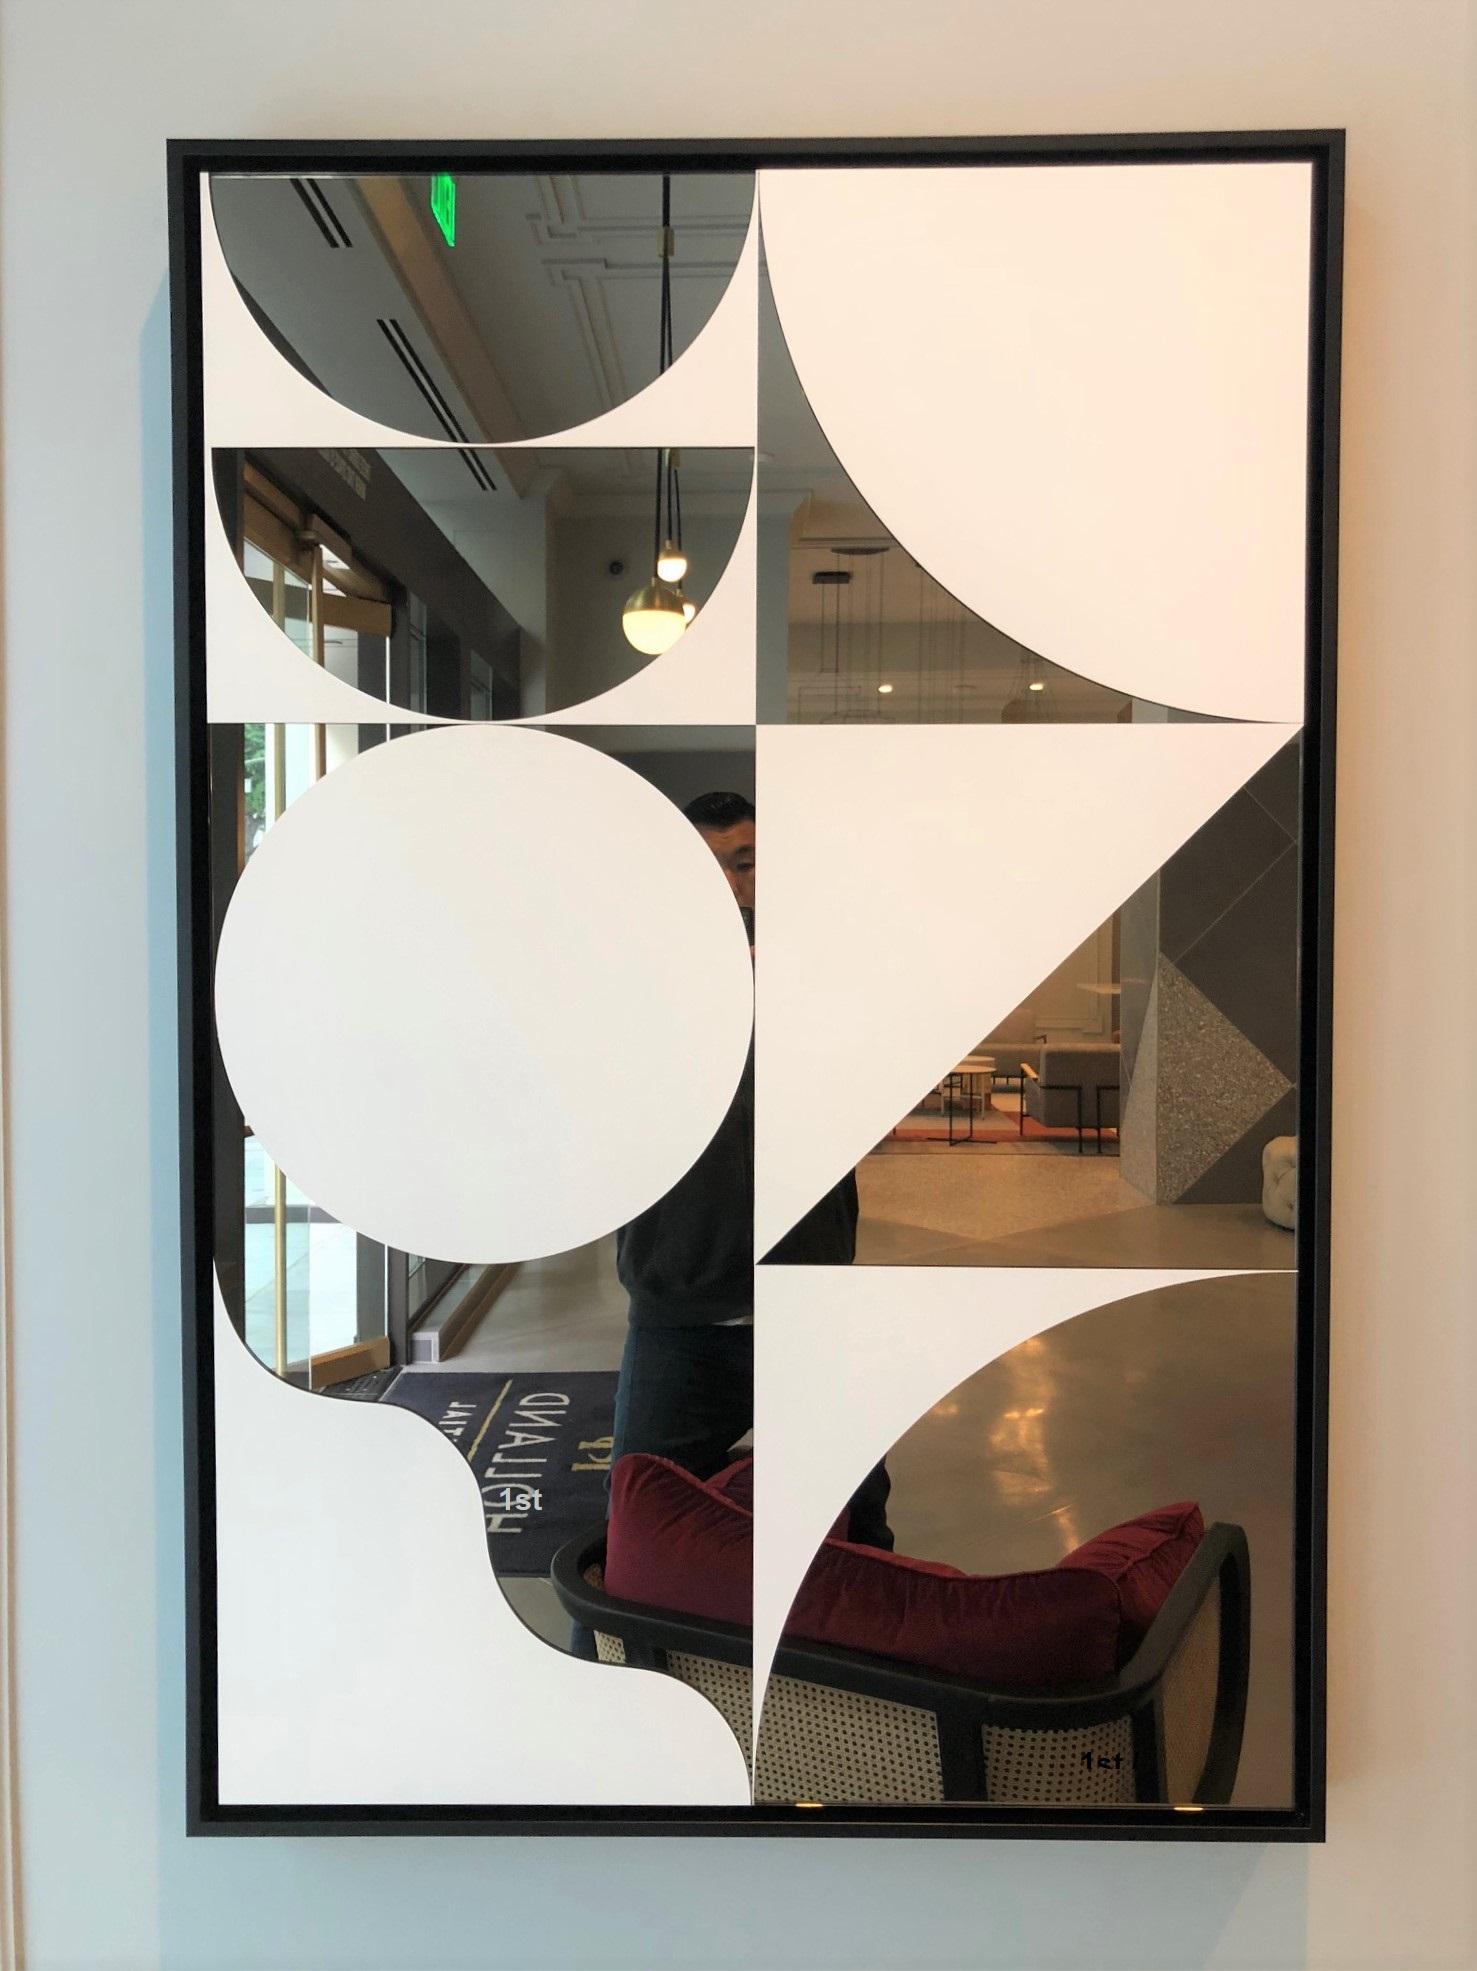 Mid Century Geometric reflections - white lacquer on bronze mirror - Mixed Media Art by Lincoln Grey